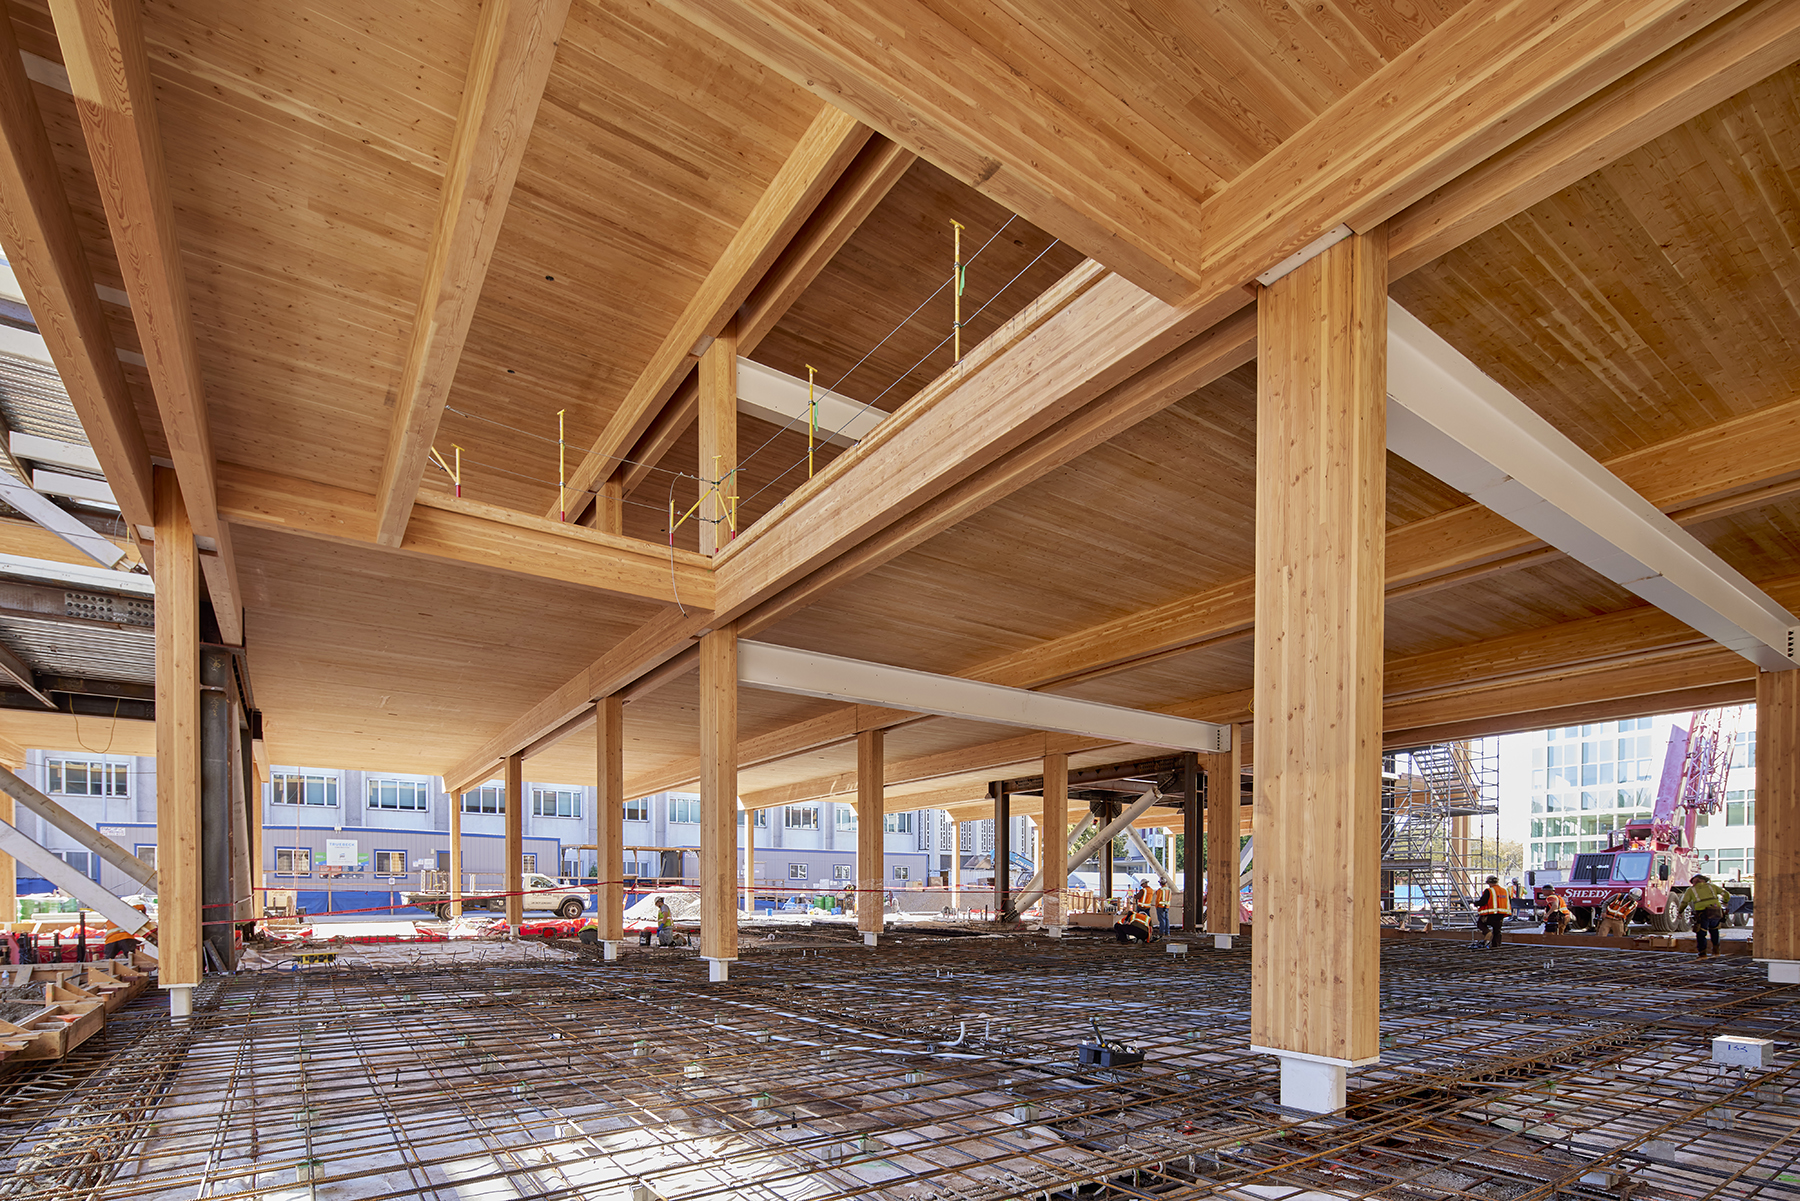 COB3 will use mass timber for its columns, beams, and flooring. (Photograph courtesy SOM) 